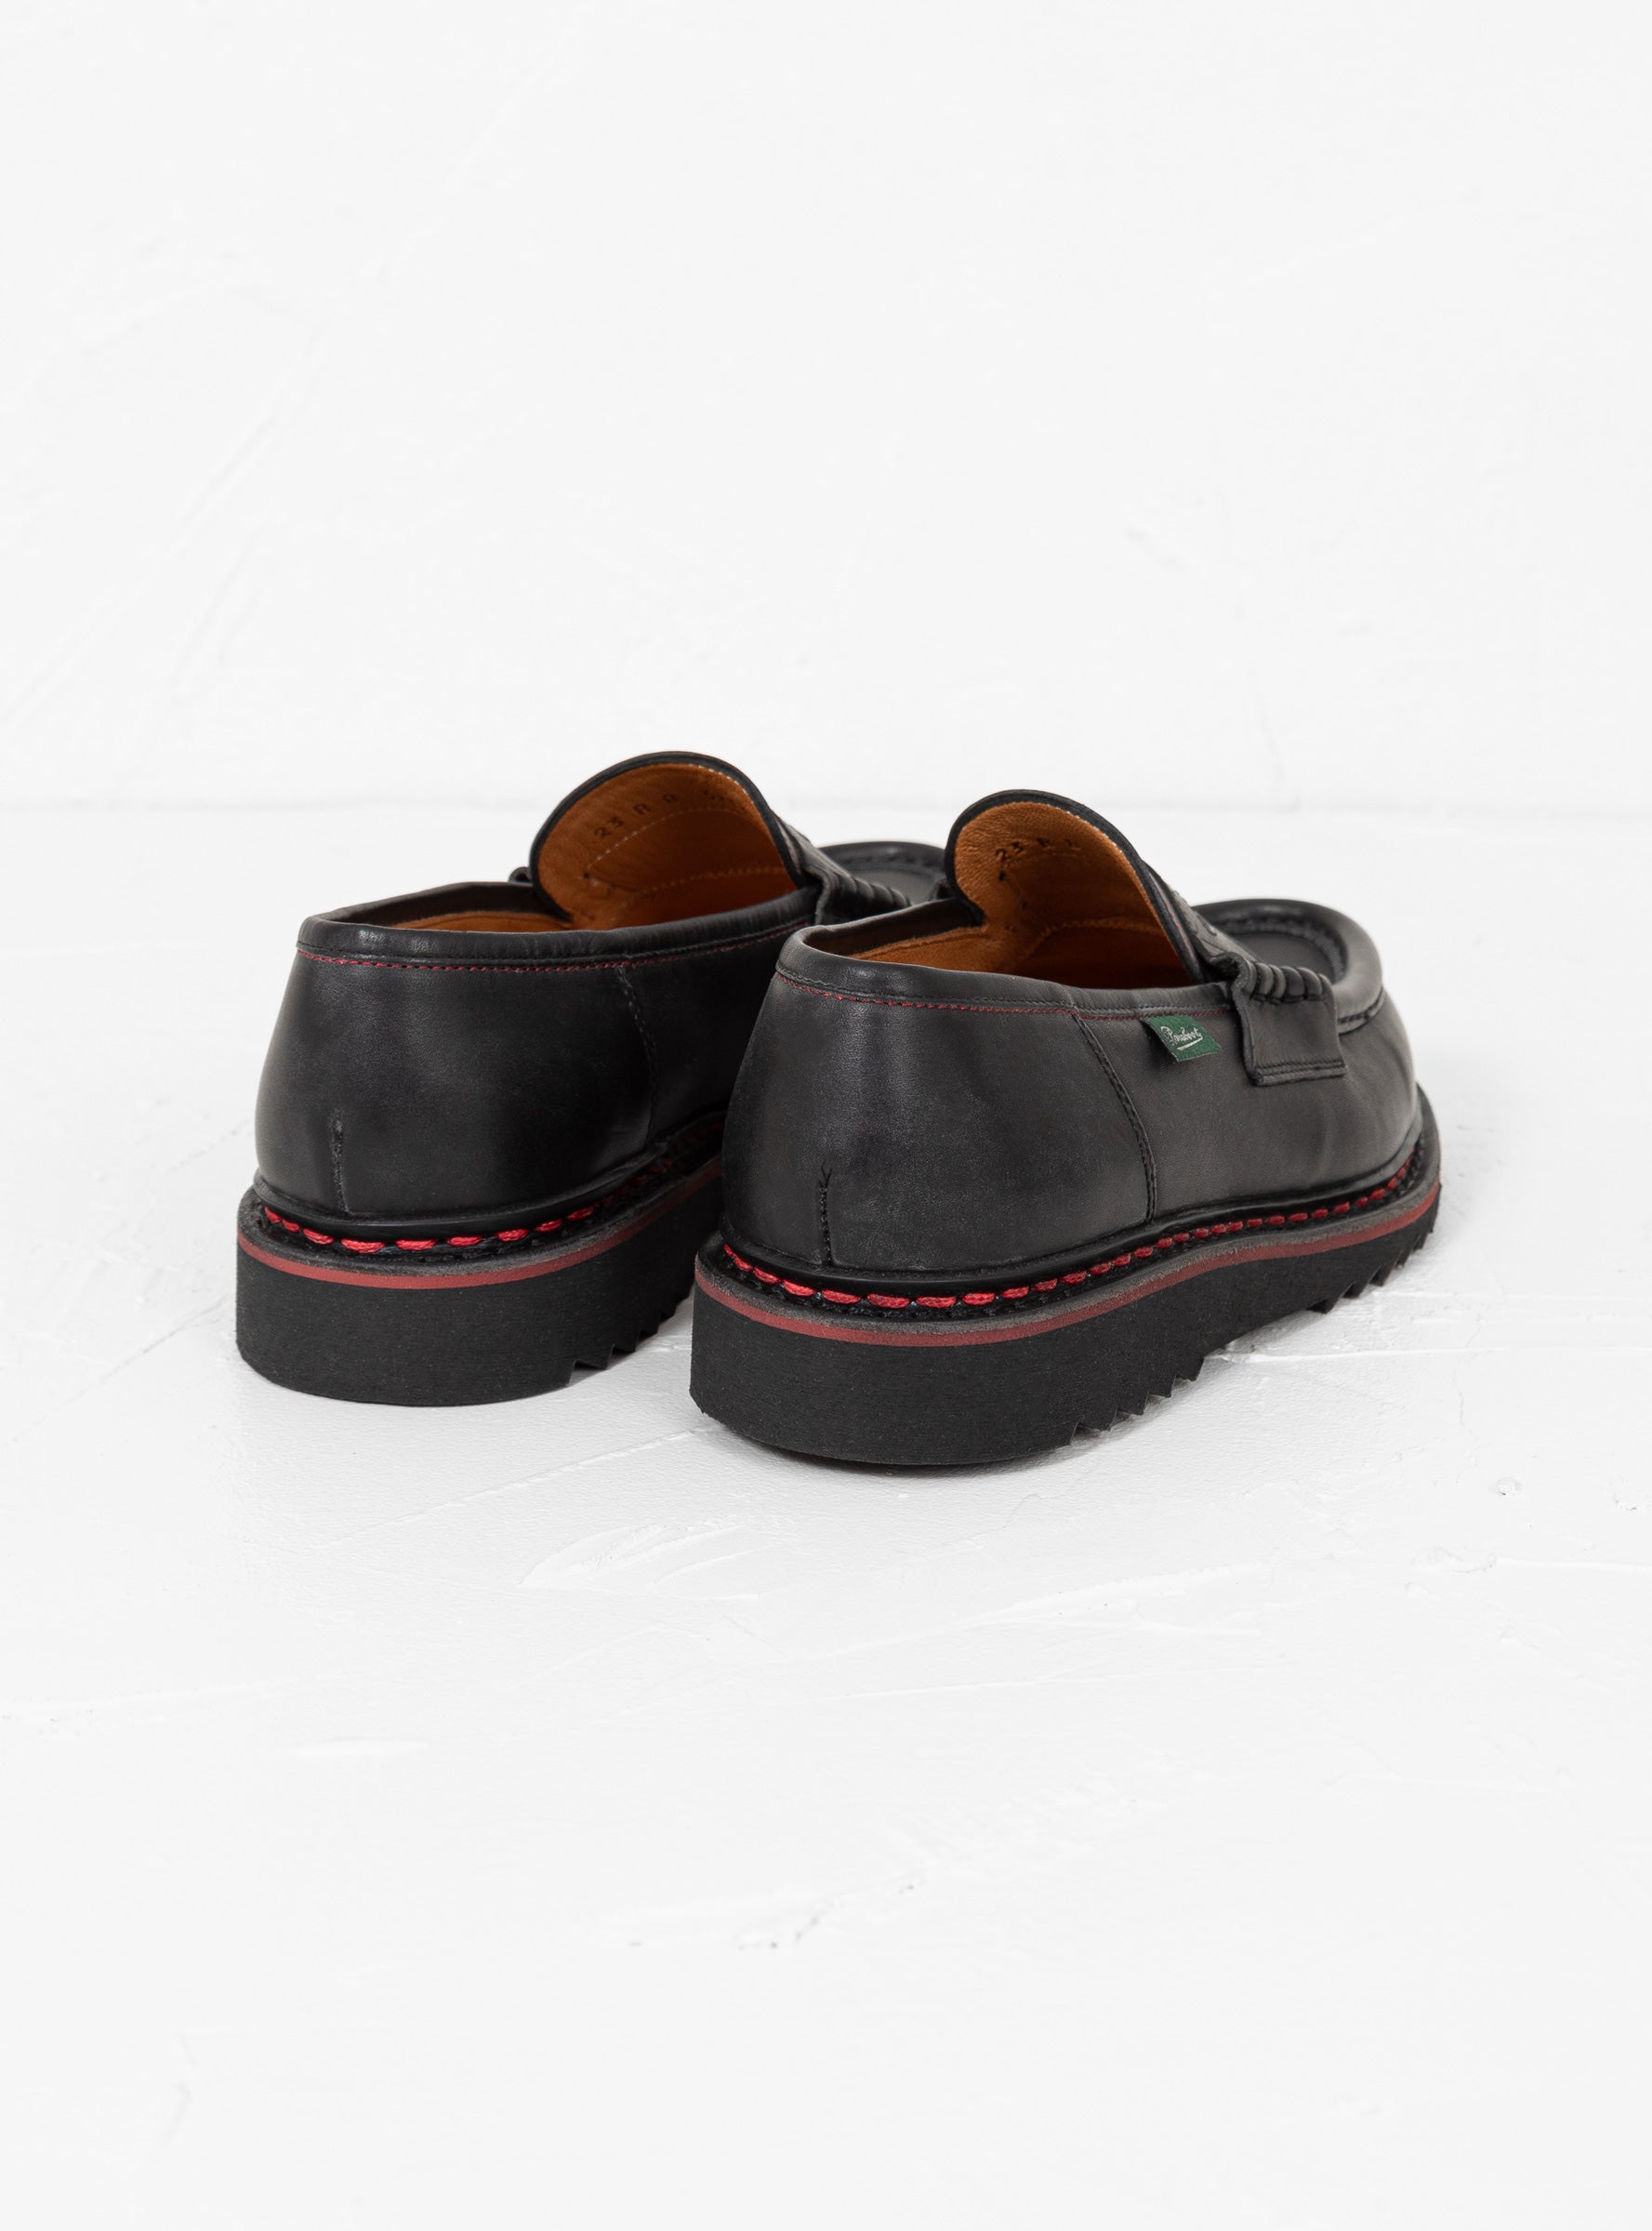 Paraboot Paraboot Reims Loafers Black & Red - Size: UK 10